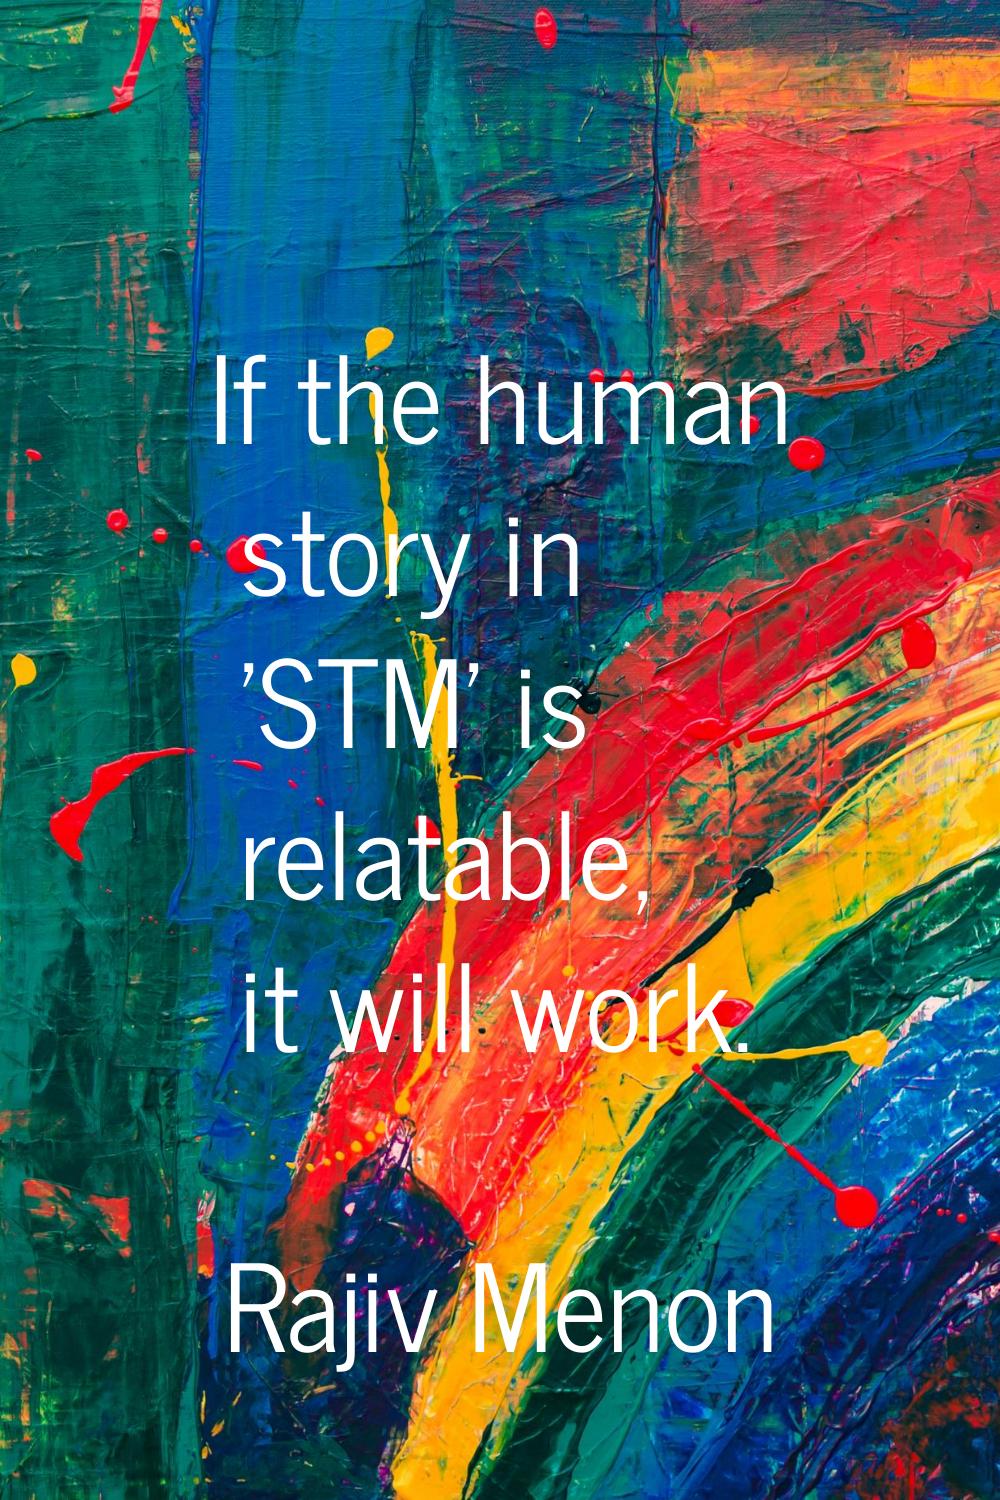 If the human story in 'STM' is relatable, it will work.